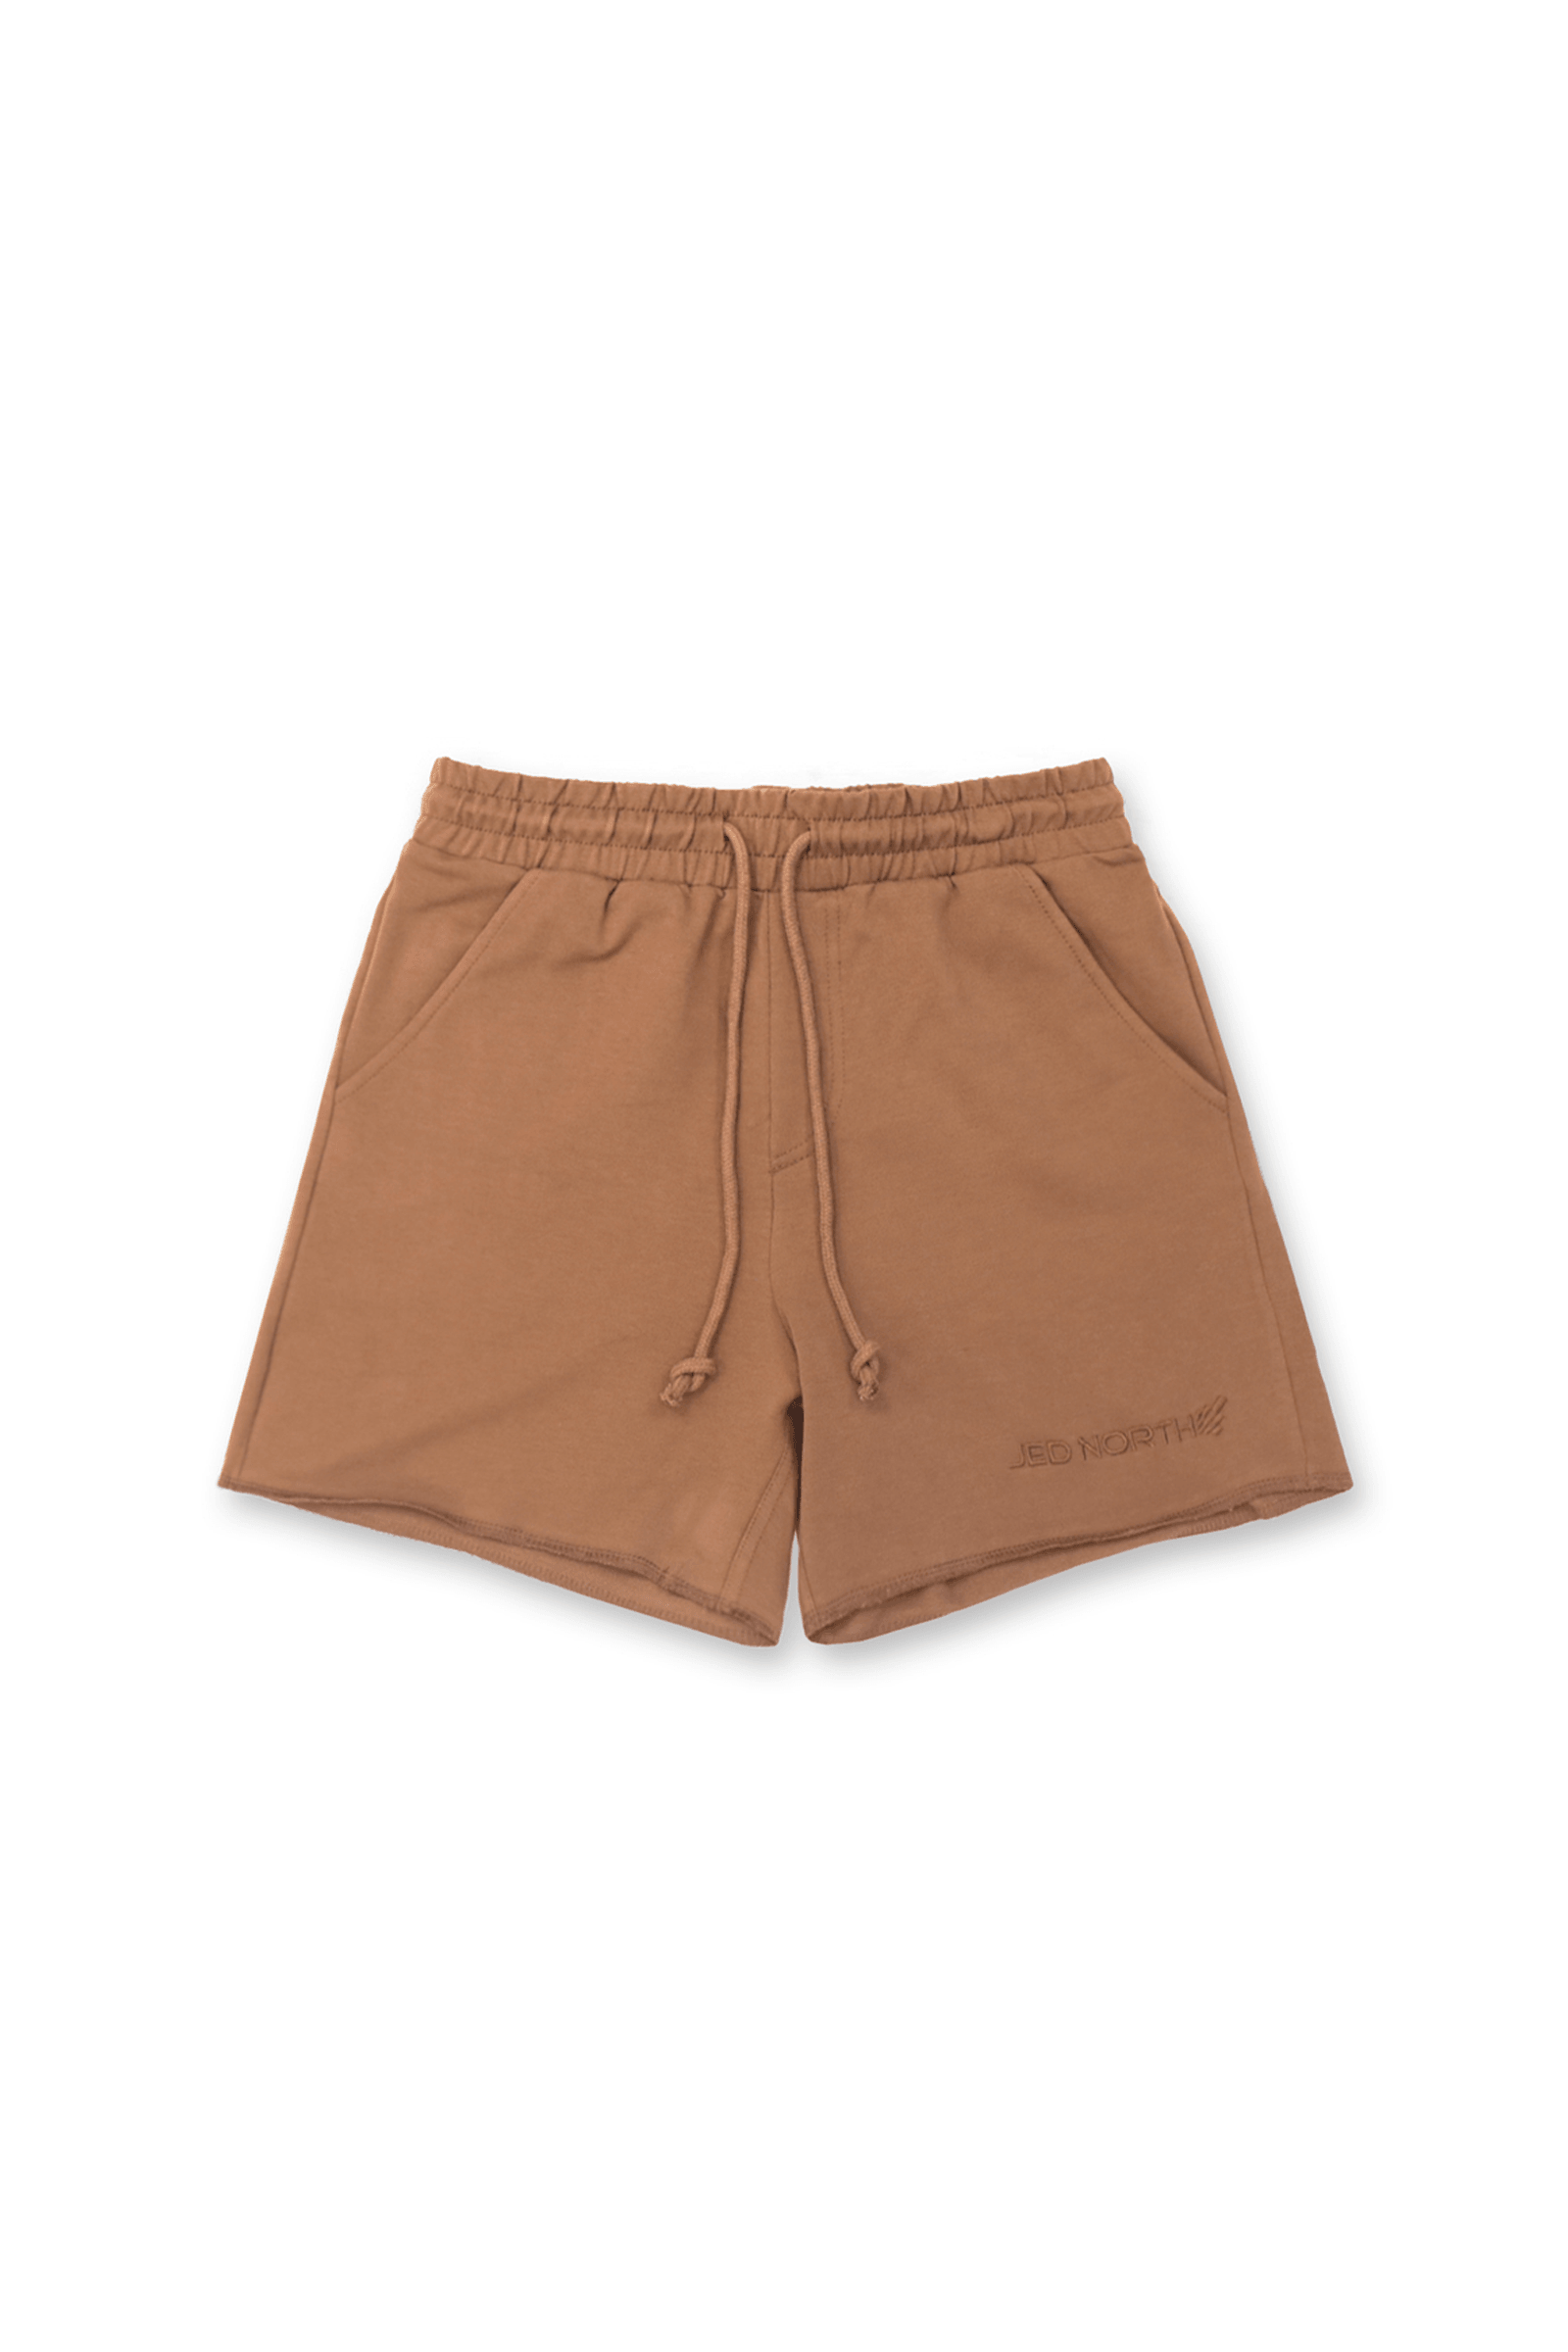 Motion 5'' Varsity Sweat Shorts - Brown - Jed North Canada